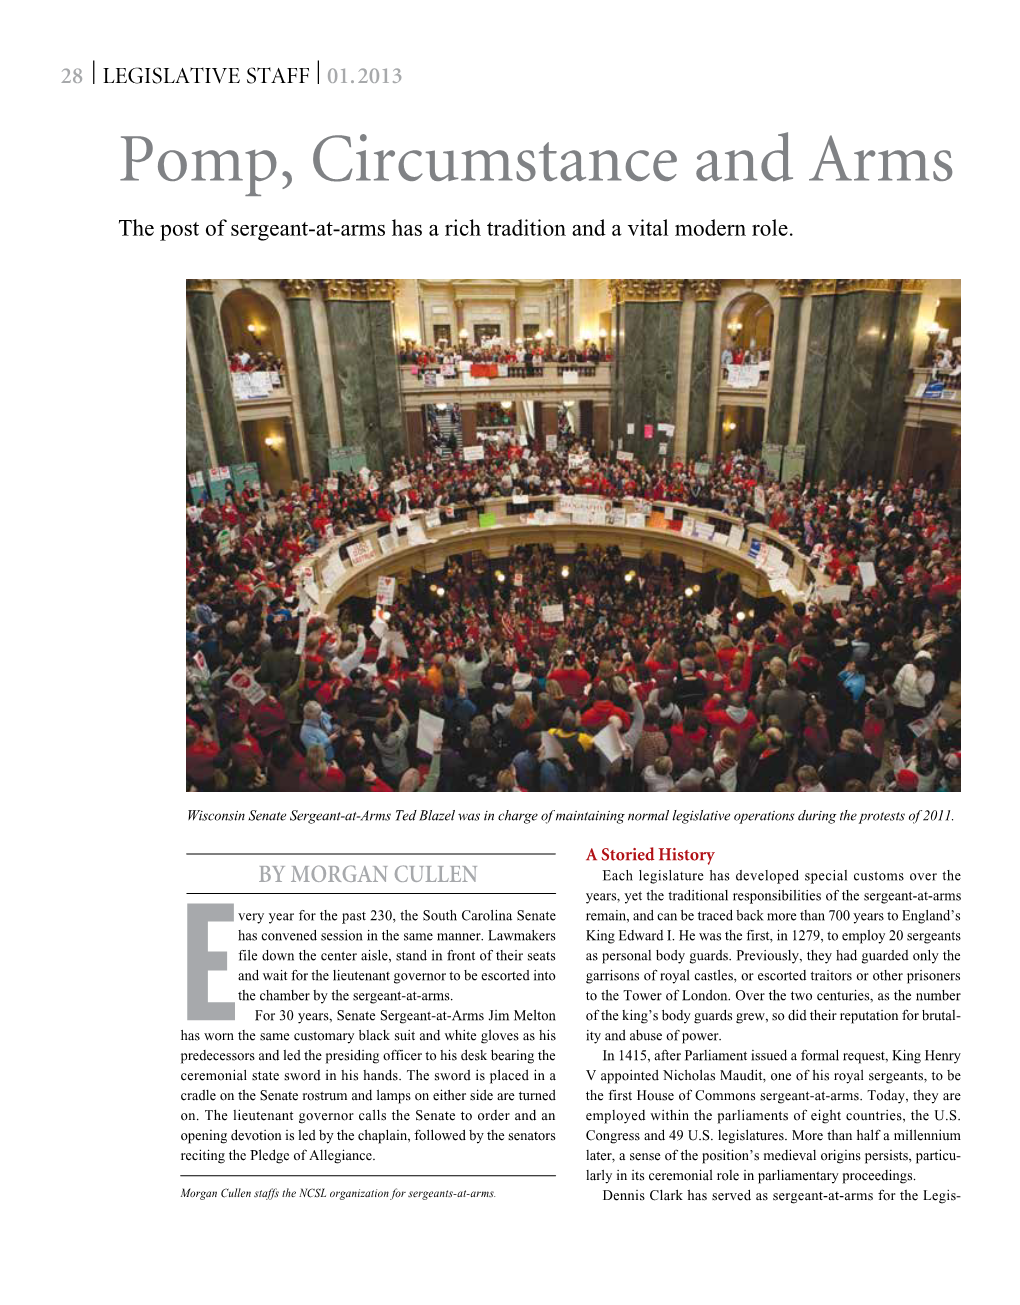 Pomp, Circumstance and Arms the Post of Sergeant-At-Arms Has a Rich Tradition and a Vital Modern Role